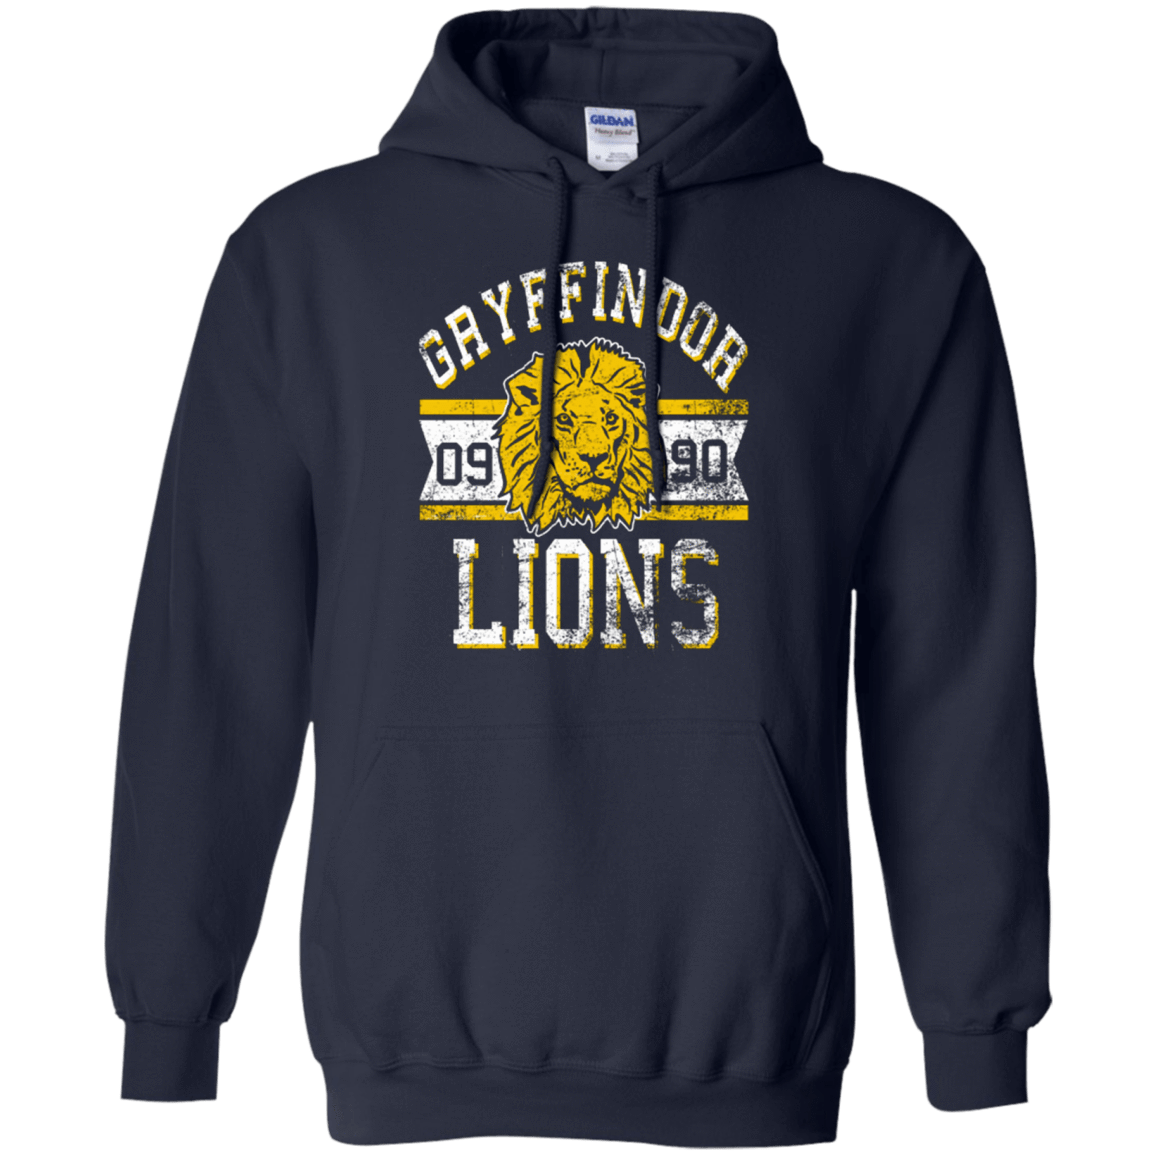 Sweatshirts Navy / Small Lions Pullover Hoodie